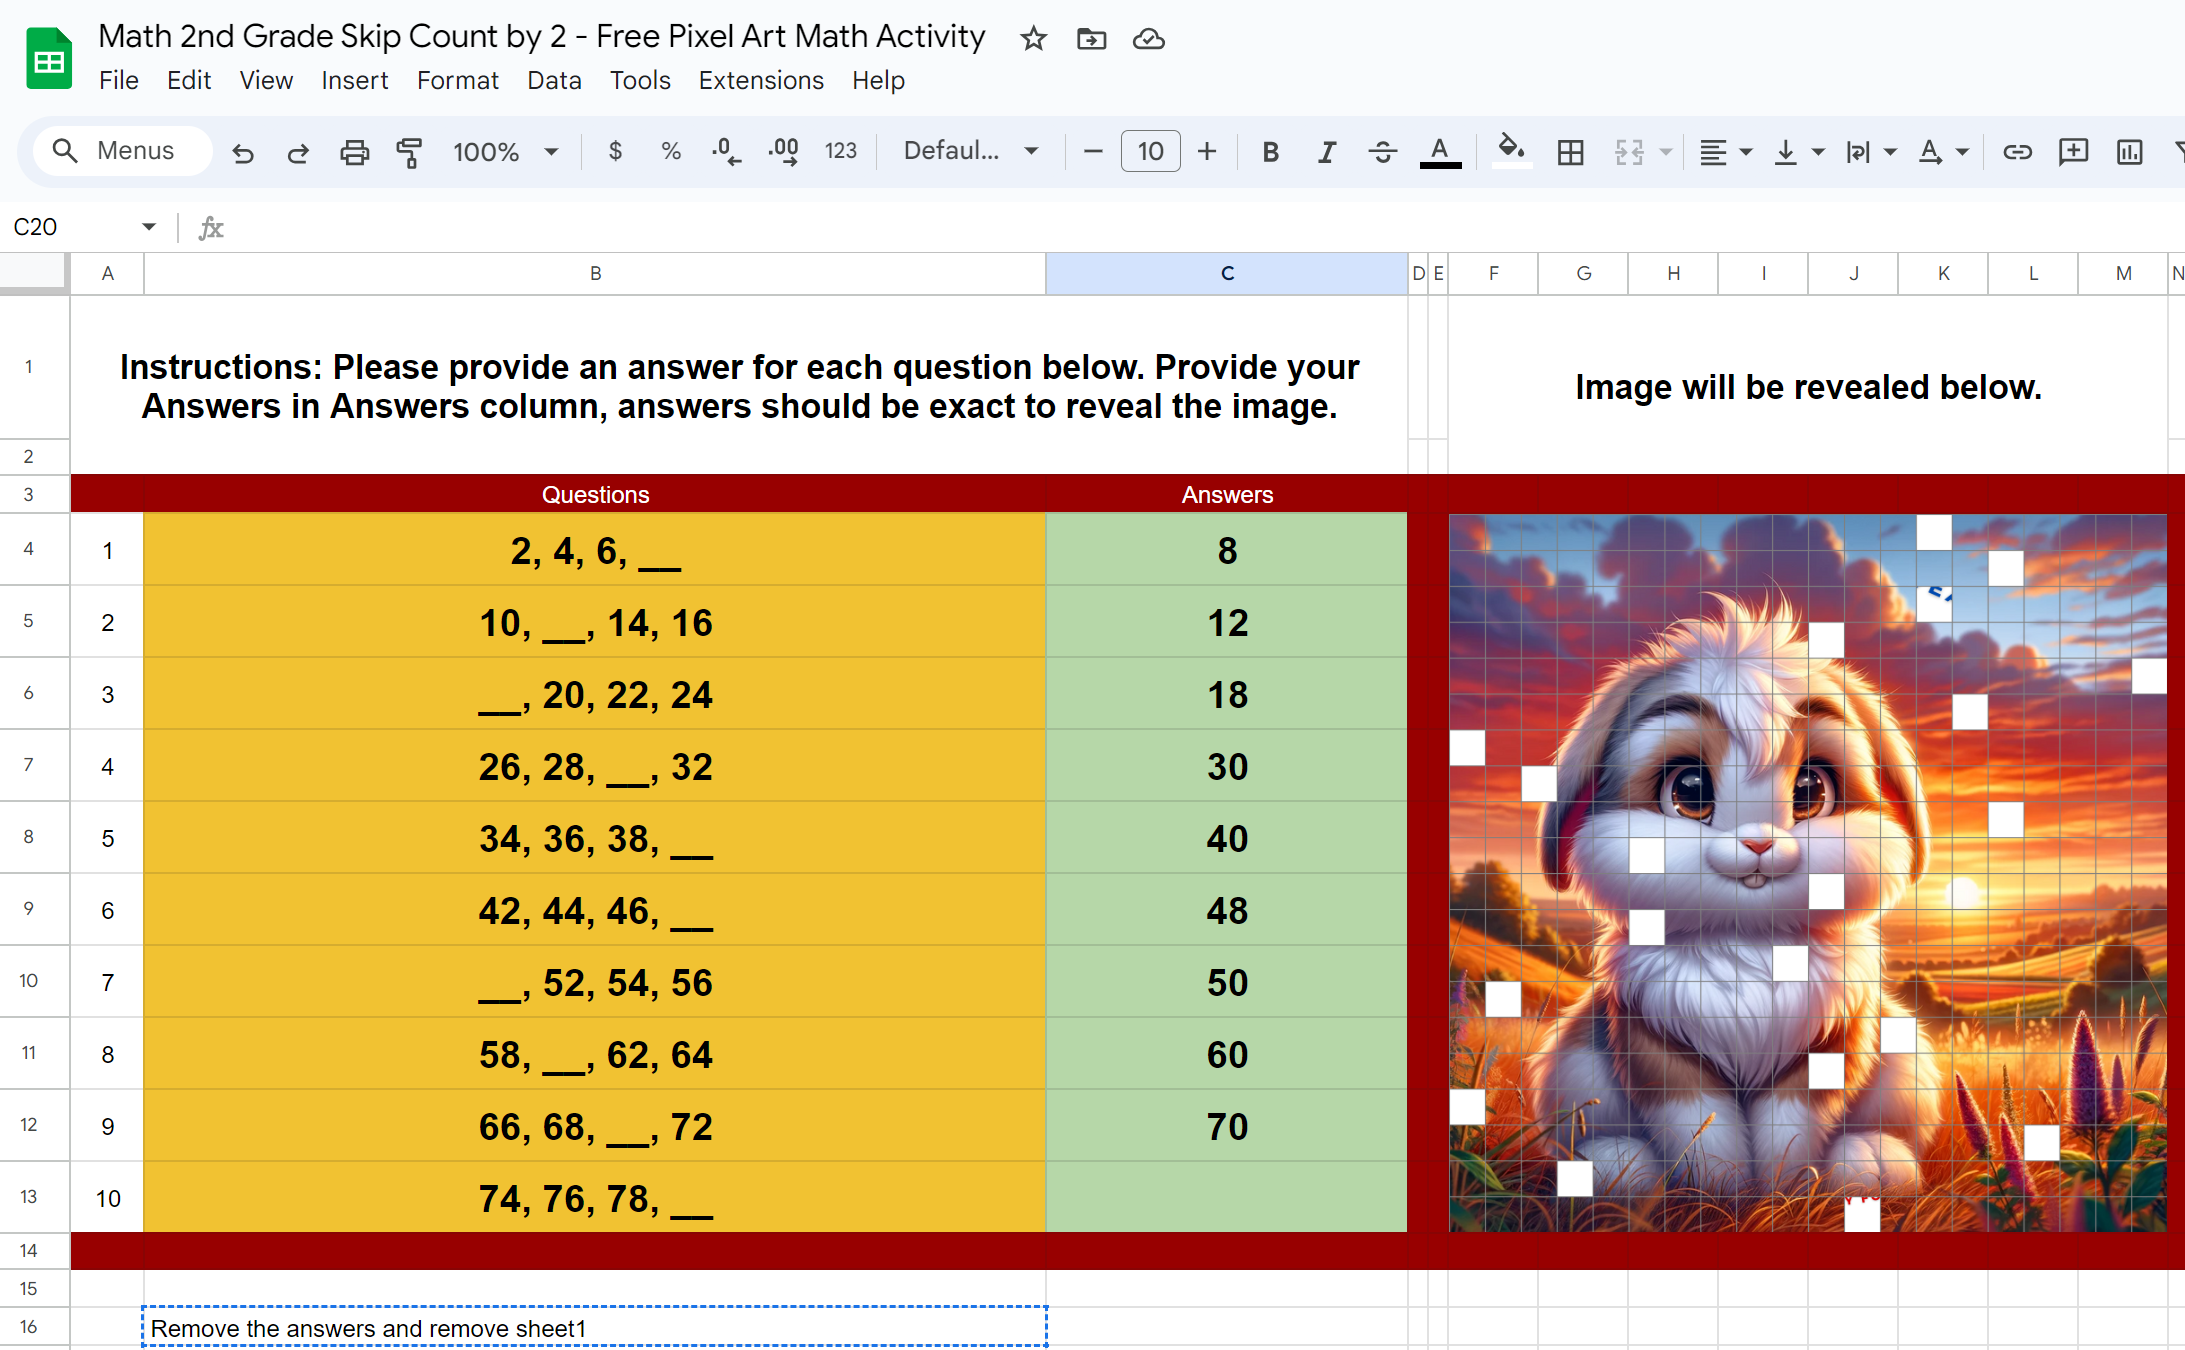 Pixel Art Math Activity Skip Count by 2 even numbers.